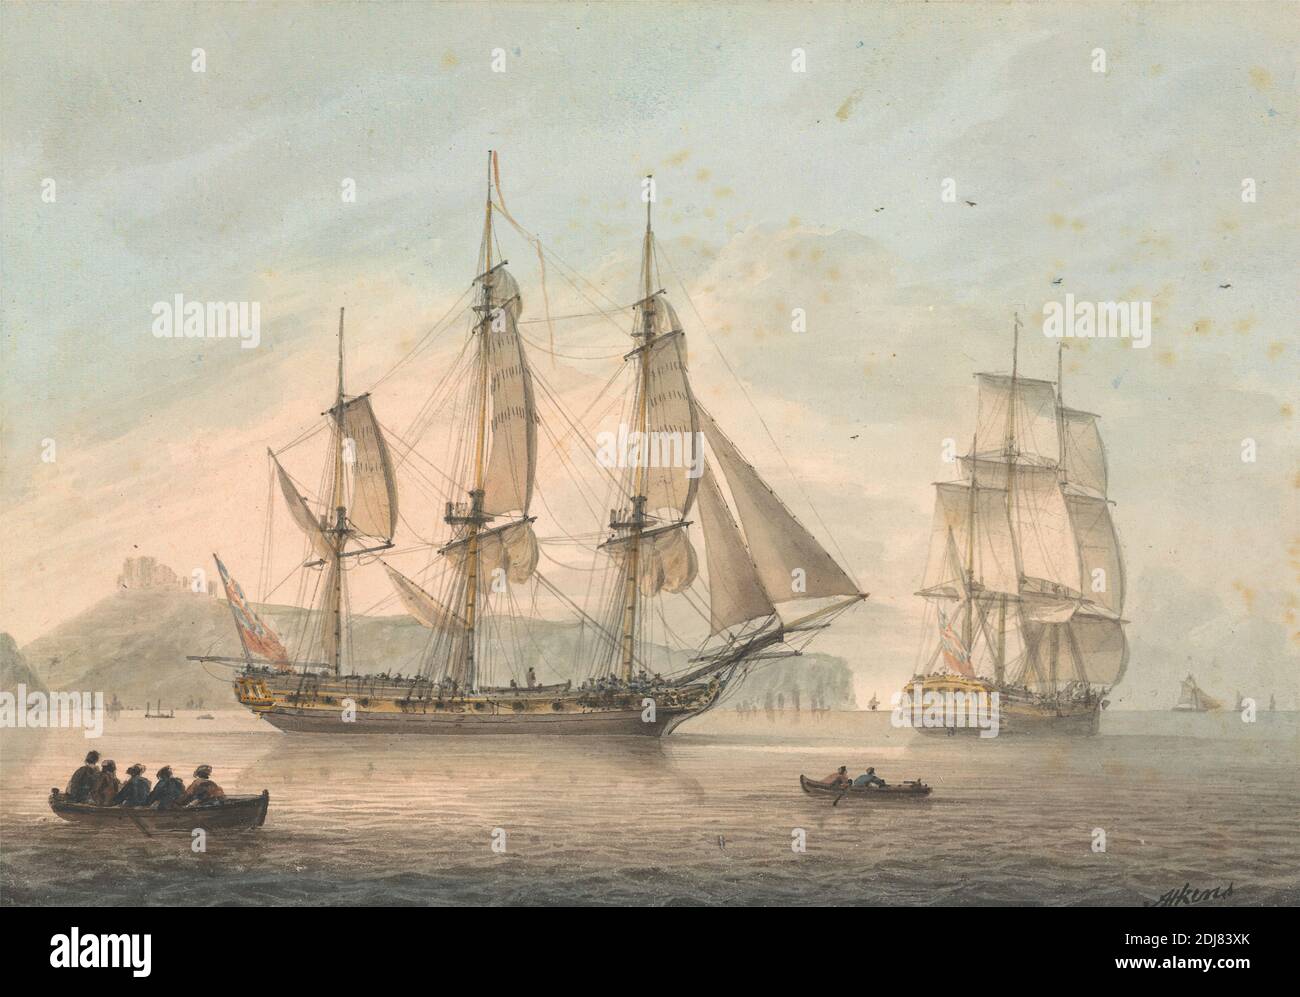 Ships of the Line off Dover, Samuel Atkins, active 1787–1808, British, active in the East Indies (1796–1804), undated, Watercolor and pen and black ink on medium, slightly textured, cream laid paper, Sheet: 4 5/8 × 6 5/8 inches (11.7 × 16.8 cm), boats, clouds, coast, Grand Tour, marine art, men, sails, ships, Dover, England, Europe, Kent, United Kingdom Stock Photo